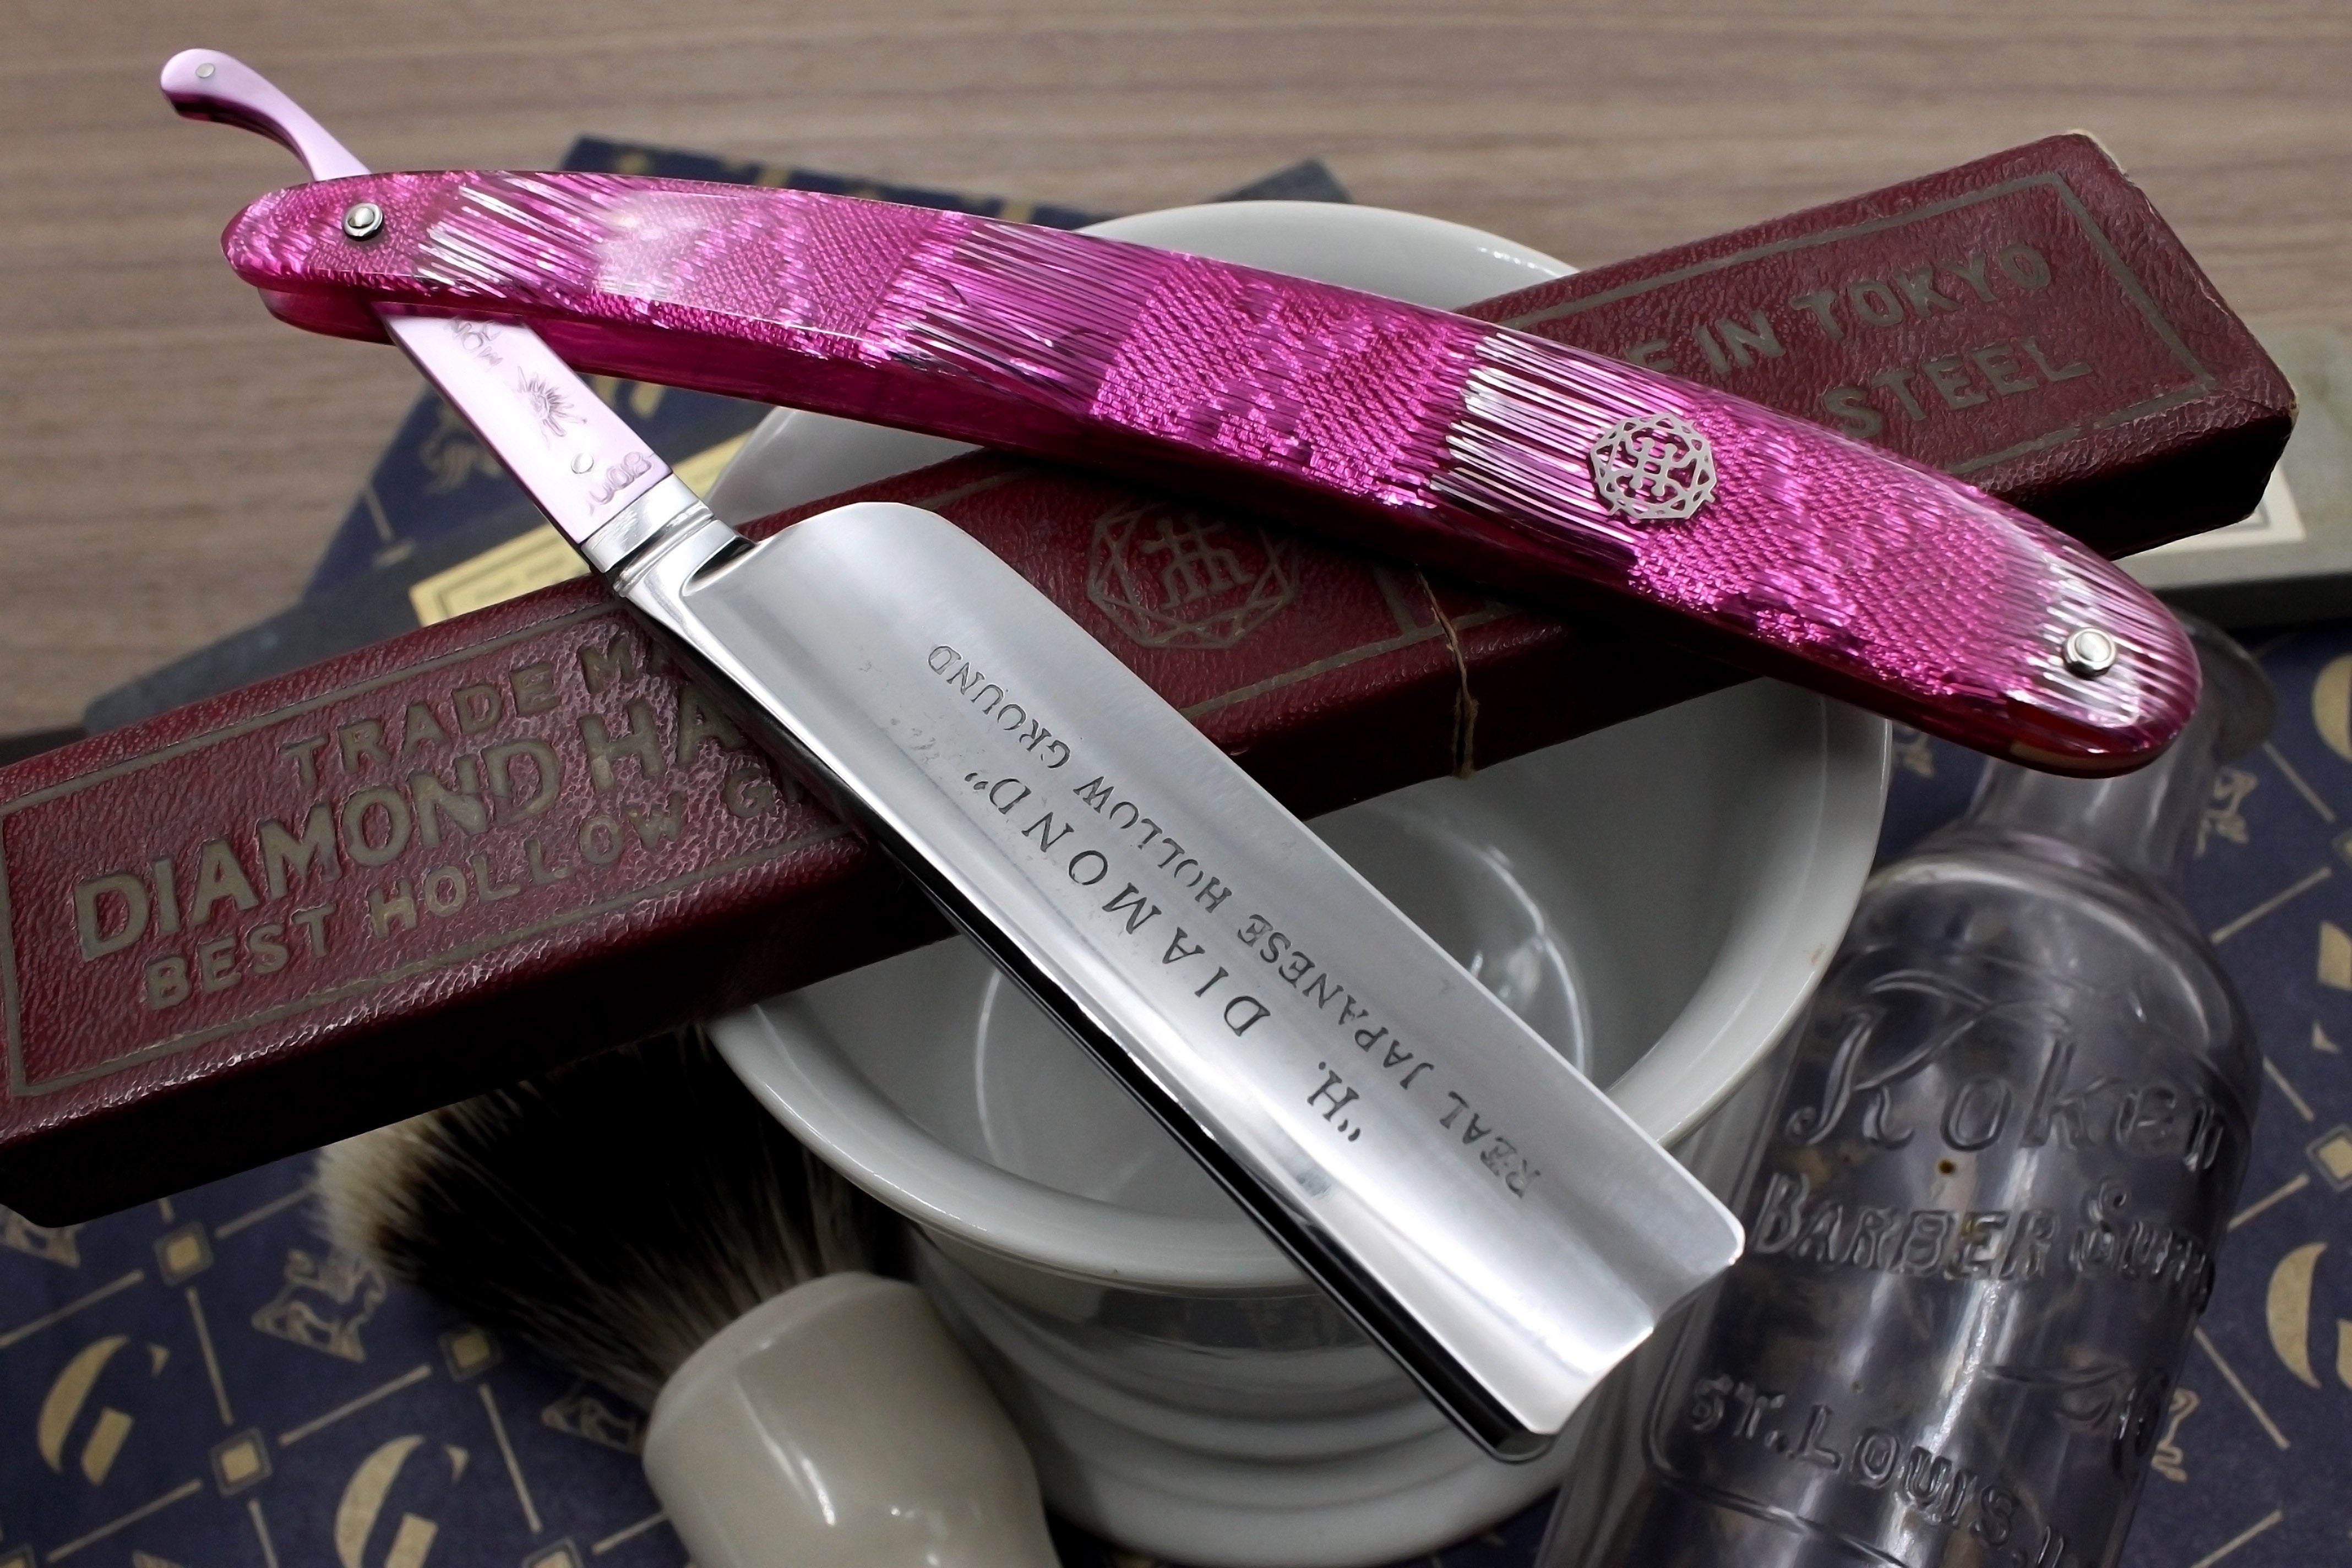 H. Diamond & Co. Very Fancy Clad Tang - 13/16 Full Hollow Vintage Japanese Straight Razor - Shave Ready